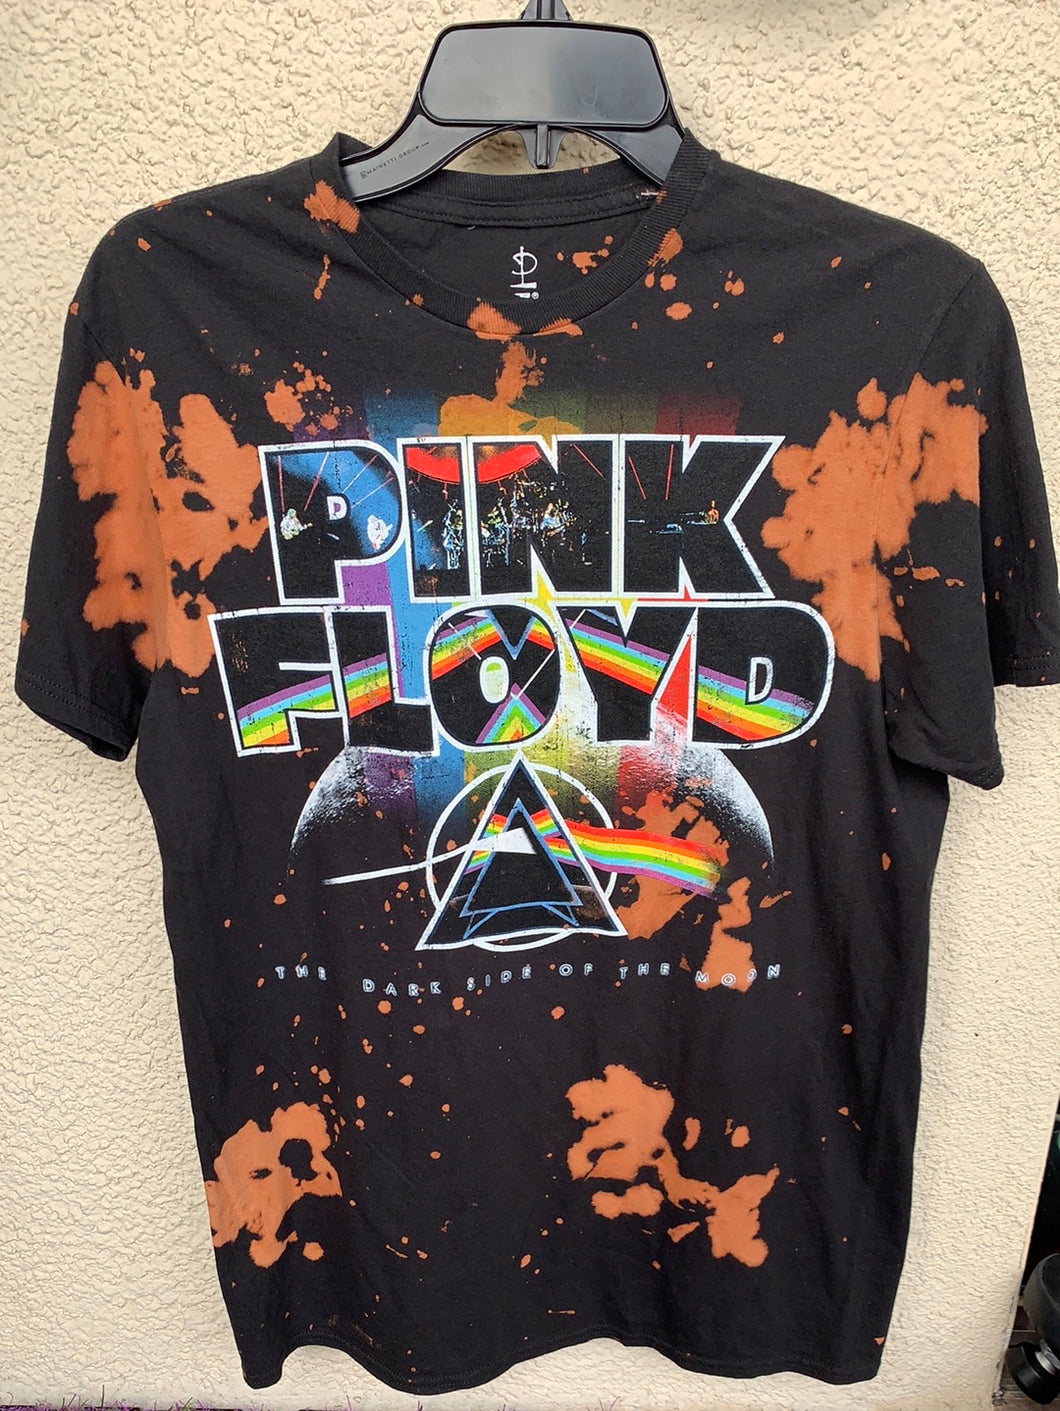 Official Pink Floyd “Dark Side of the Moon” Band Tee Size M